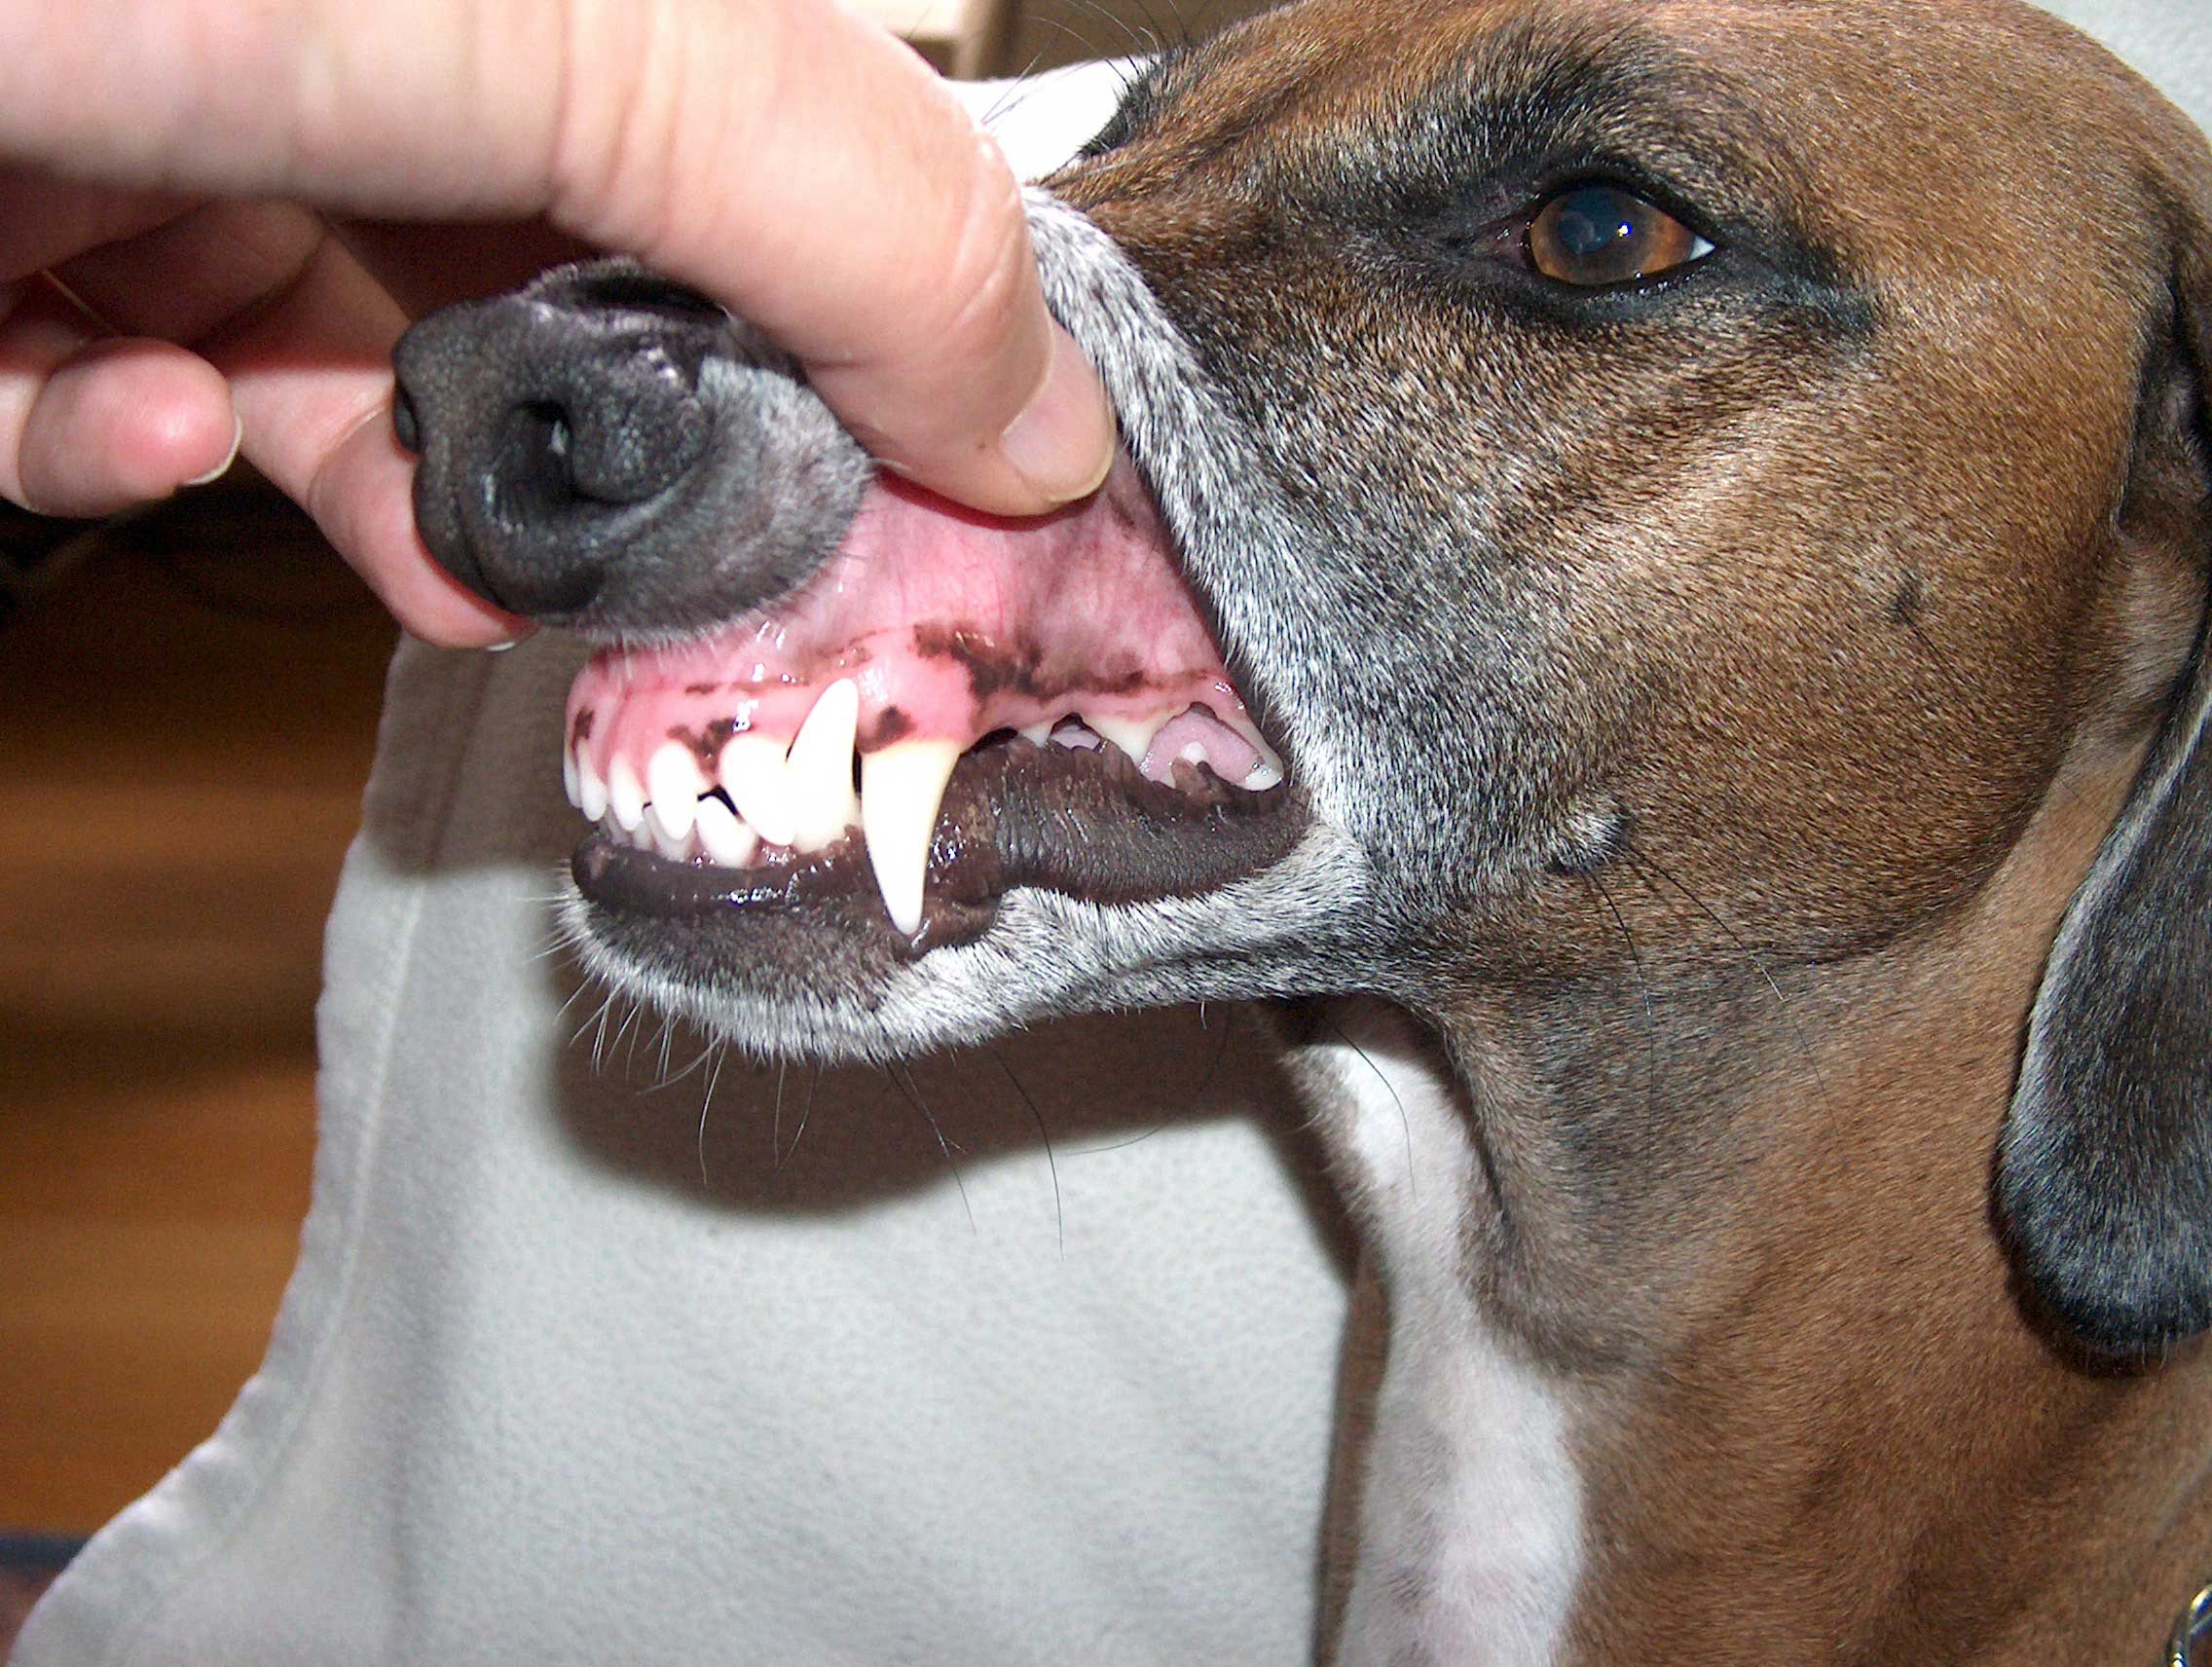 do dogs get teeth after 1 year